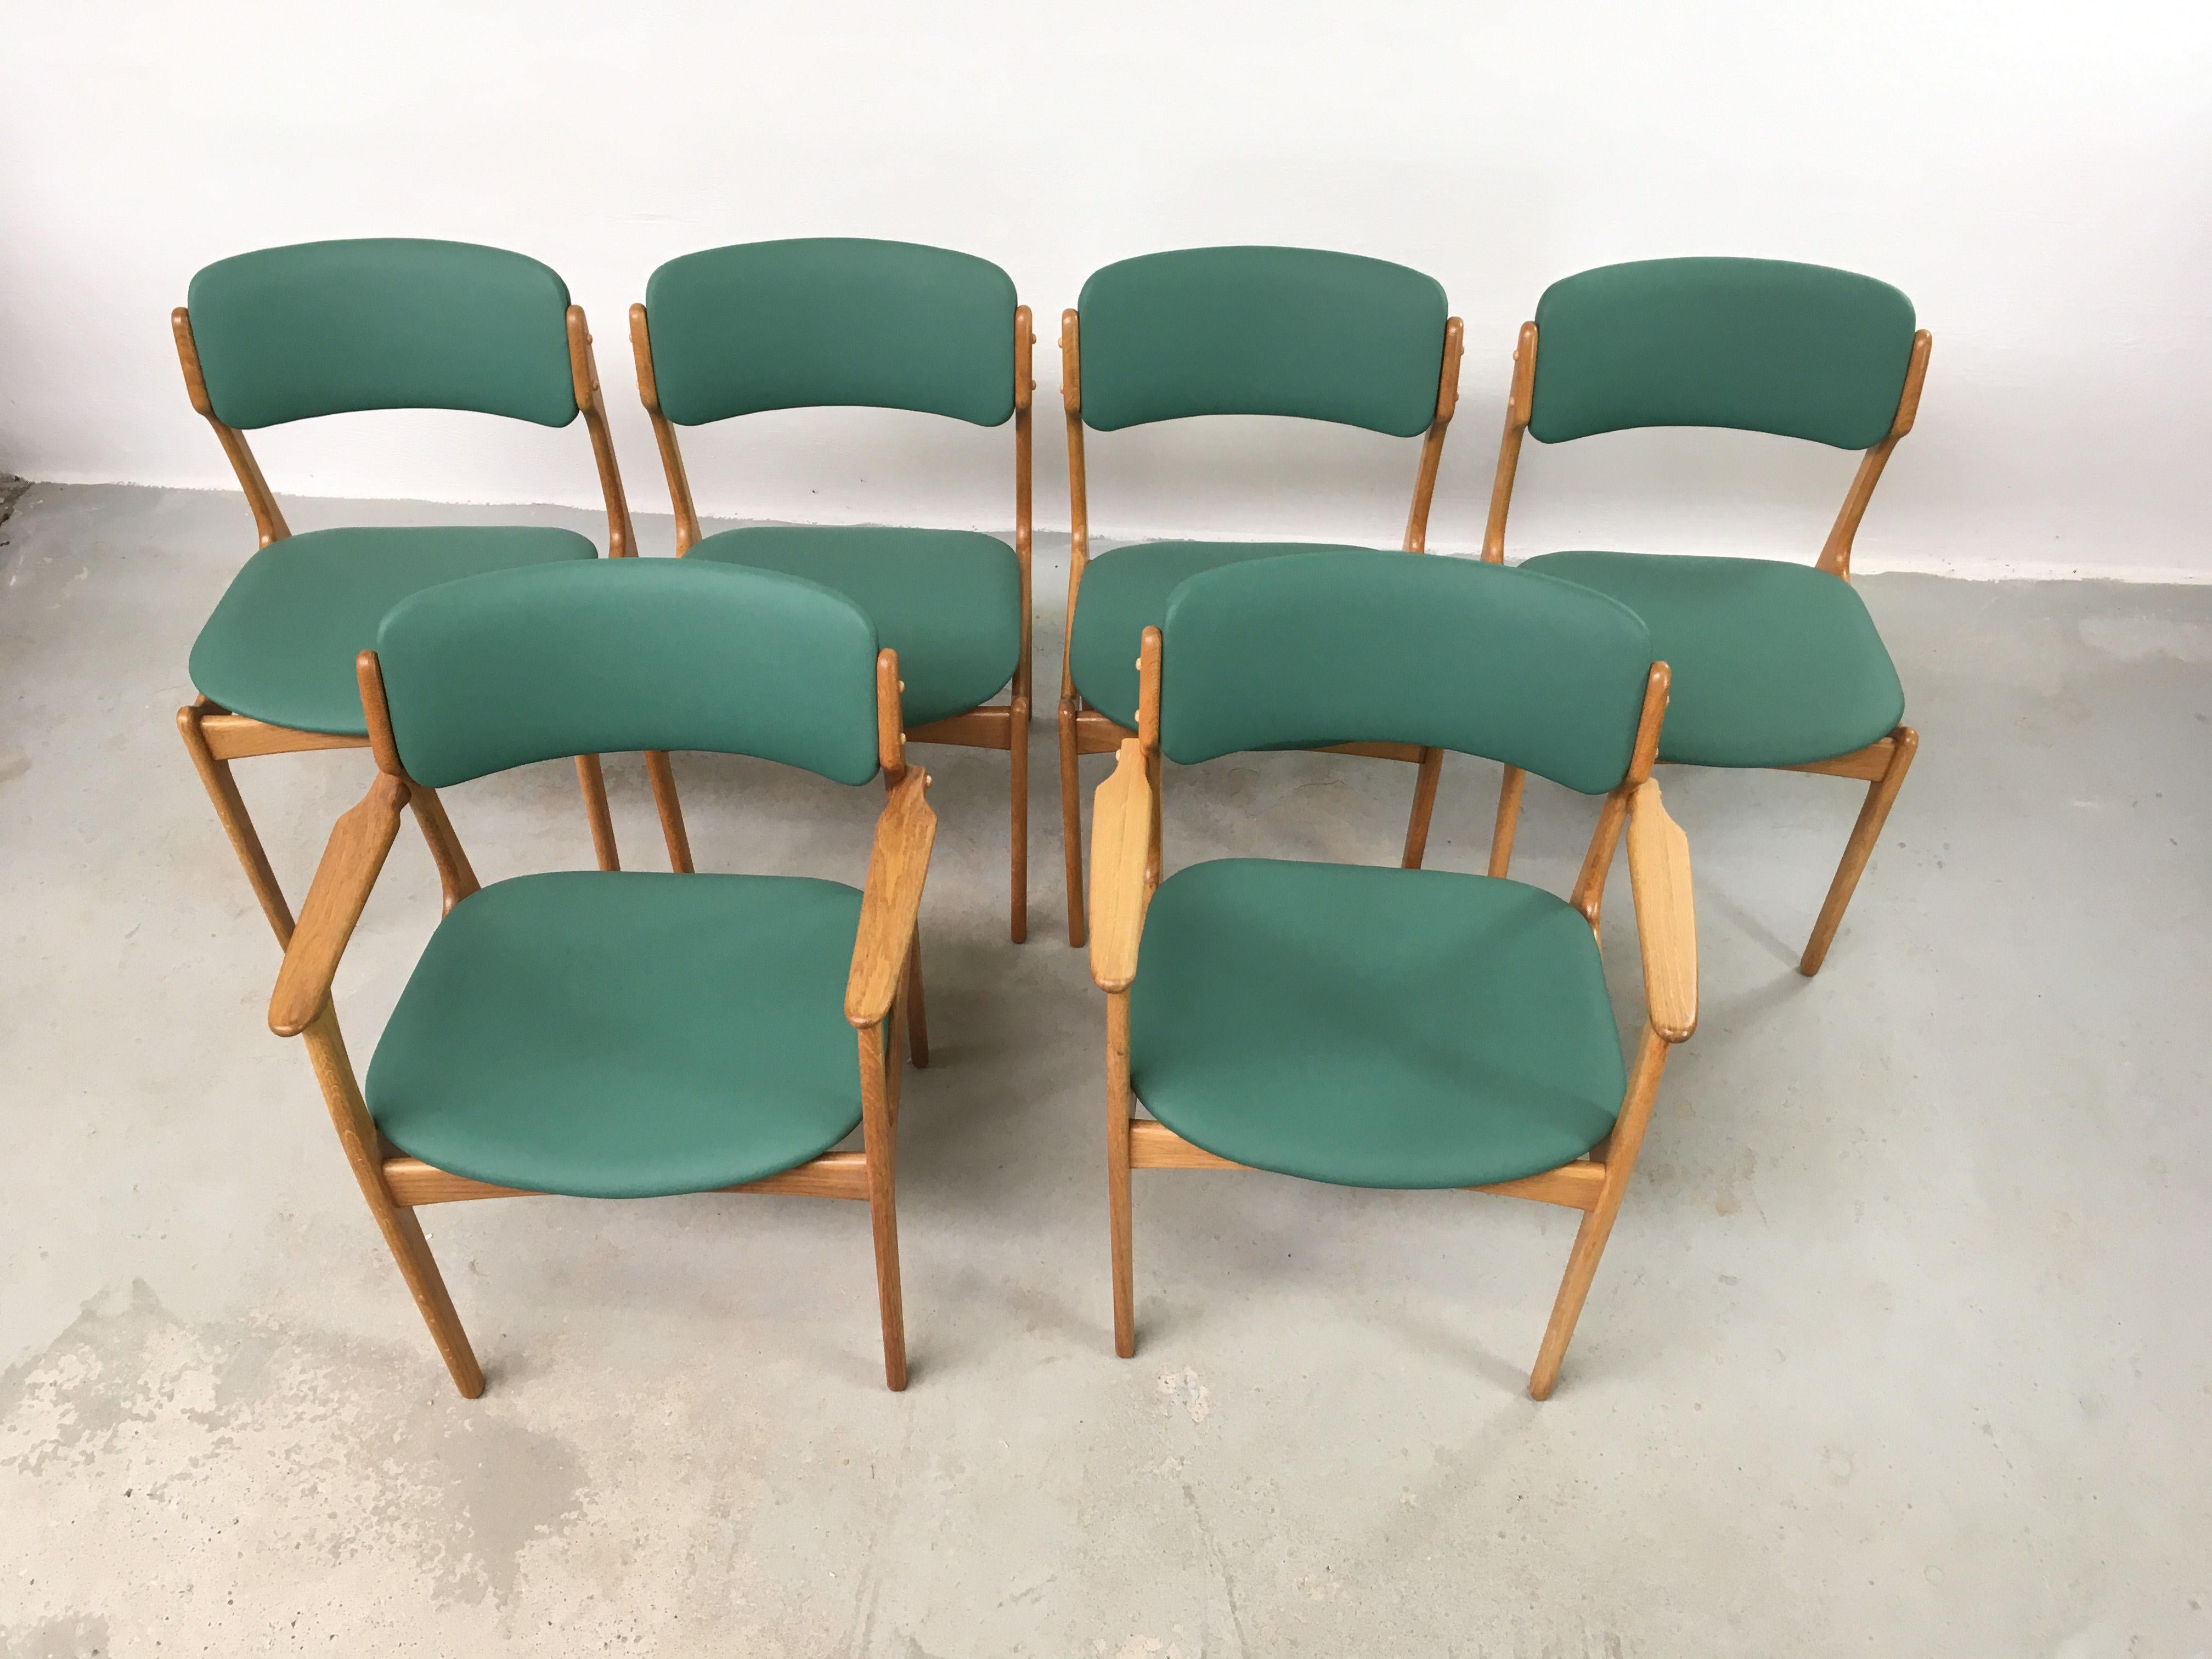 Six fully restored Erik Buch oak dining chairs, custom Reupholstery.

The set consists of 4 rosewood Erik Buch dining chairs and two rosewood Erik Buch armchairs with floating seats 

The chairs have a simple yet solid construction with elegant